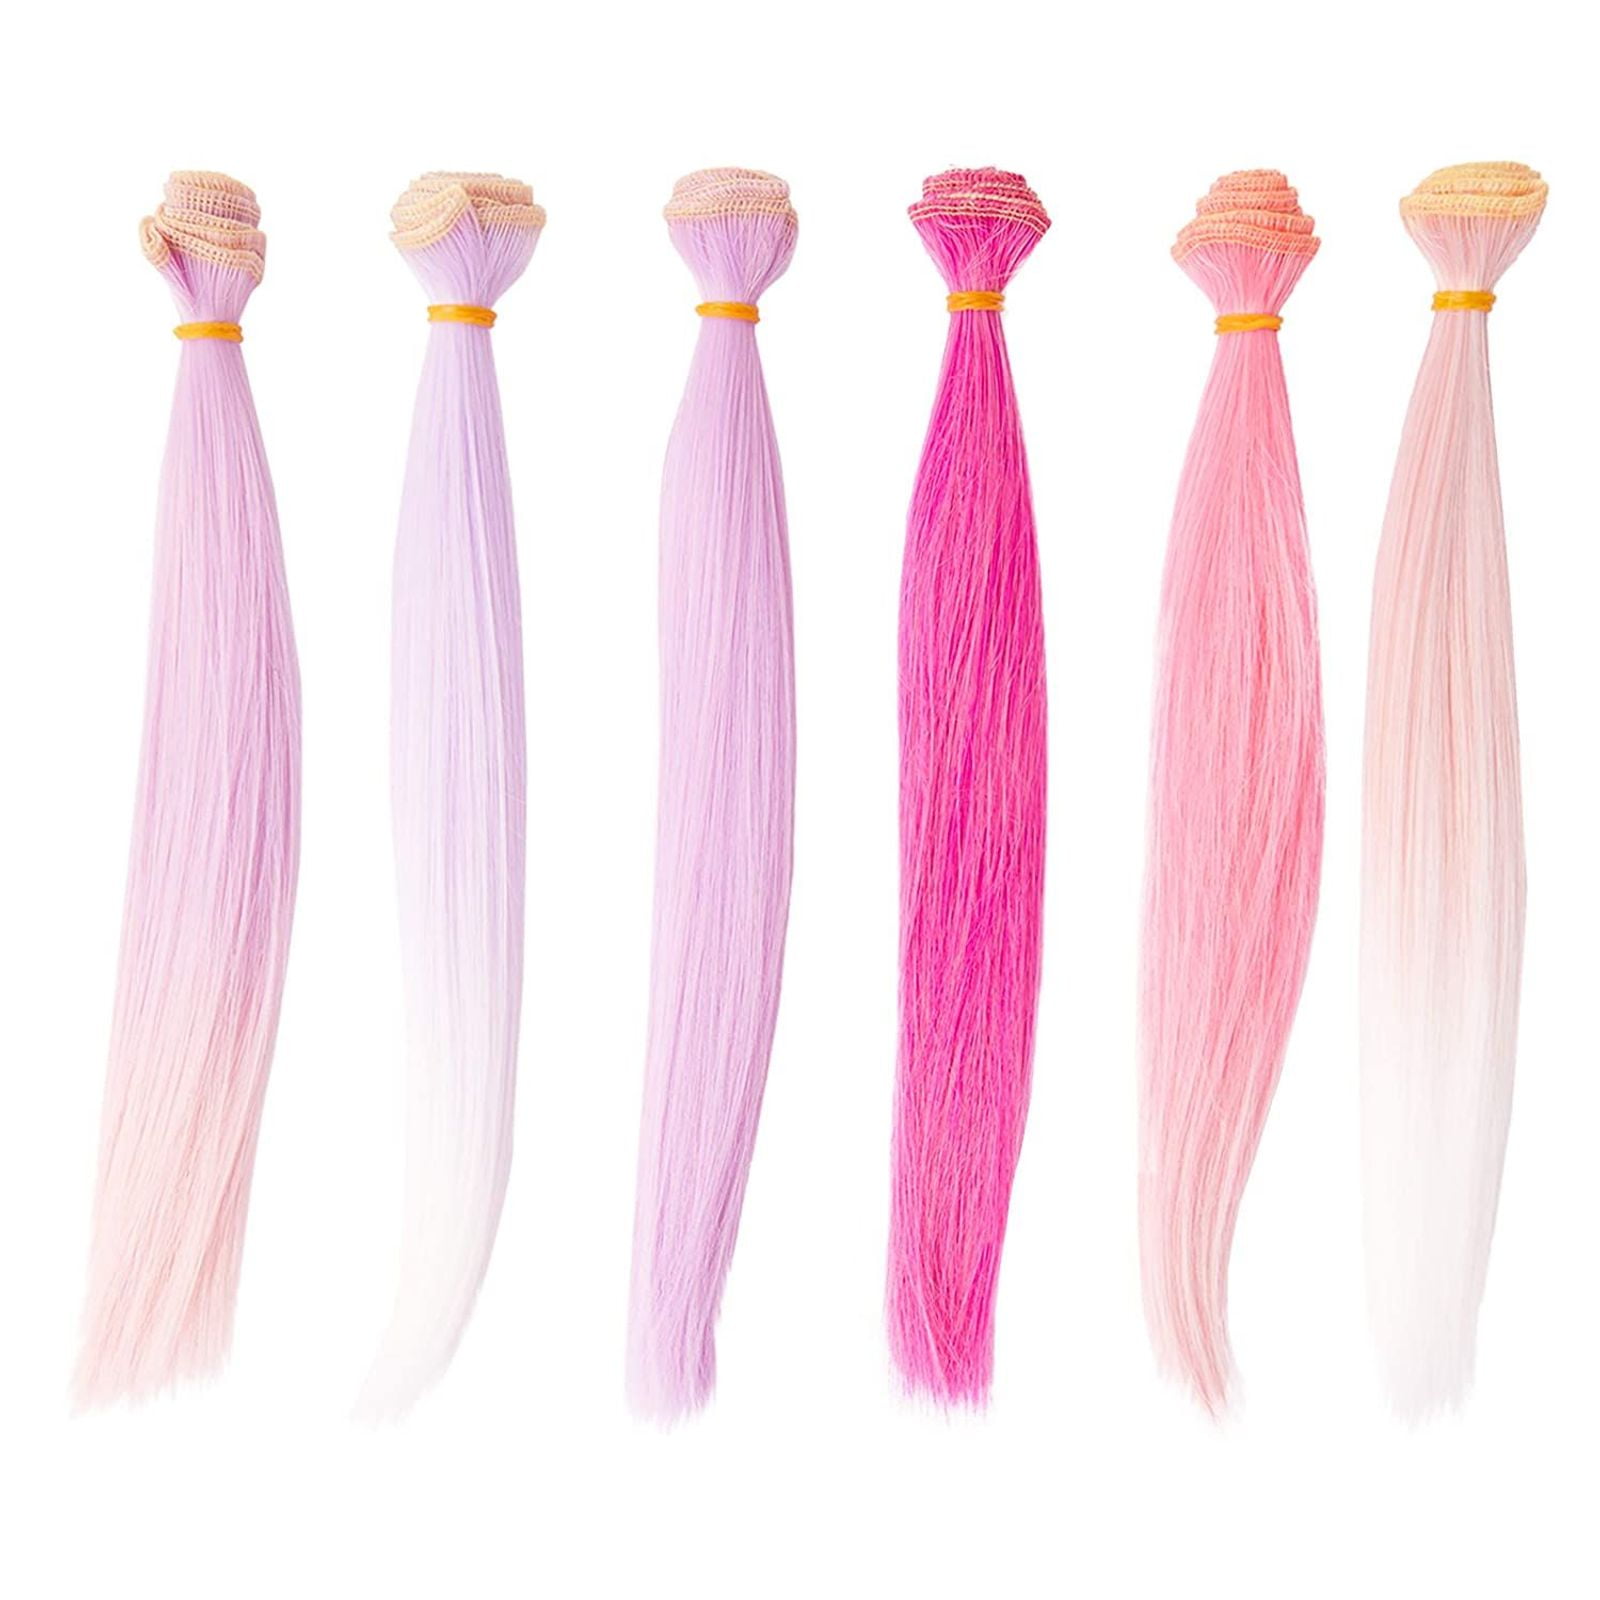 24 Pack Straight Synthetic Doll Hair Wefts for Rerooting, Wig Making (5.9 in, 12 Colors)